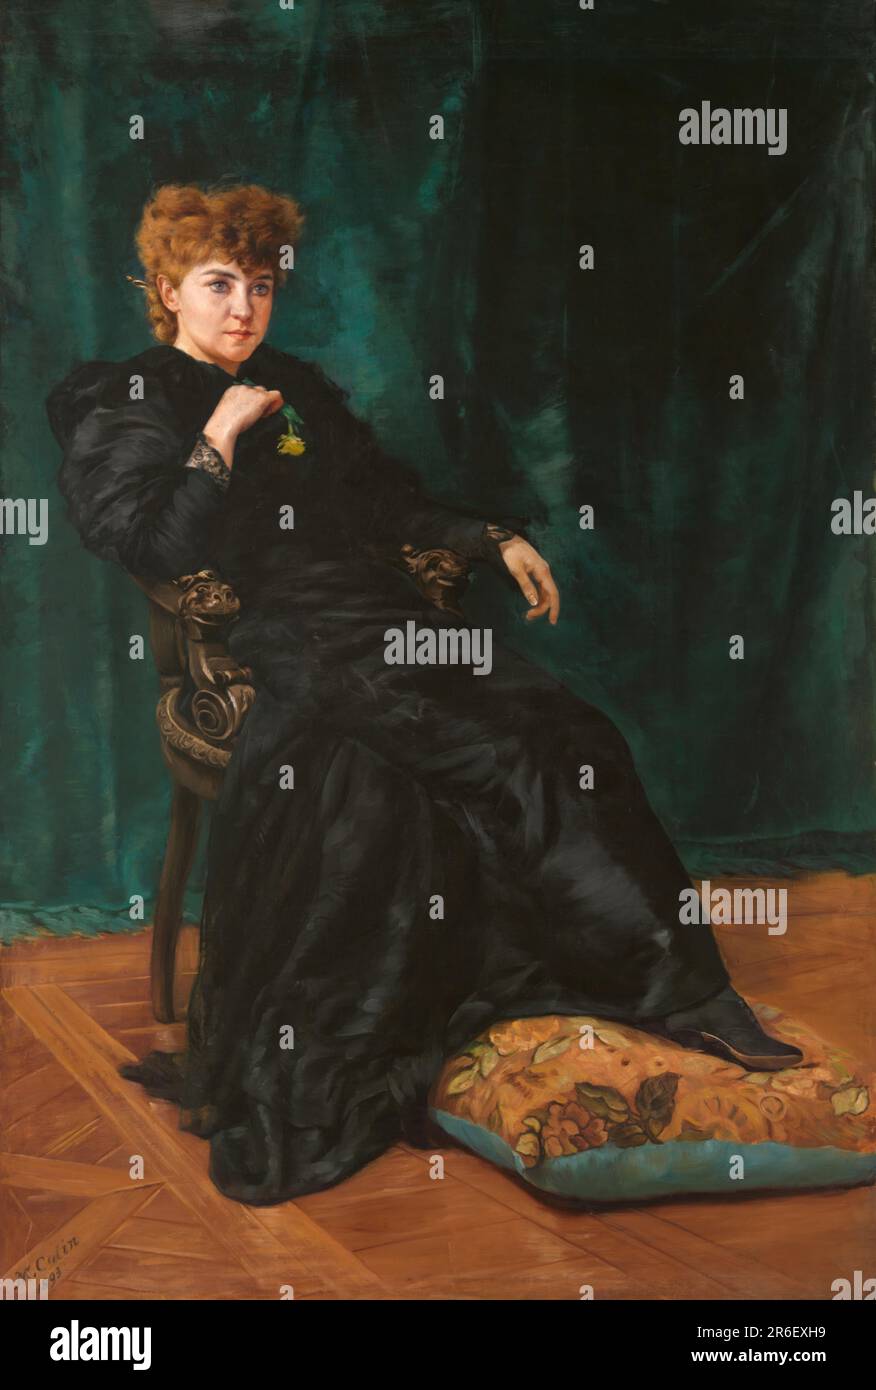 Minnie Maddern Fiske. Date: 1893. oil on canvas. Museum: NATIONAL PORTRAIT GALLERY. Stock Photo